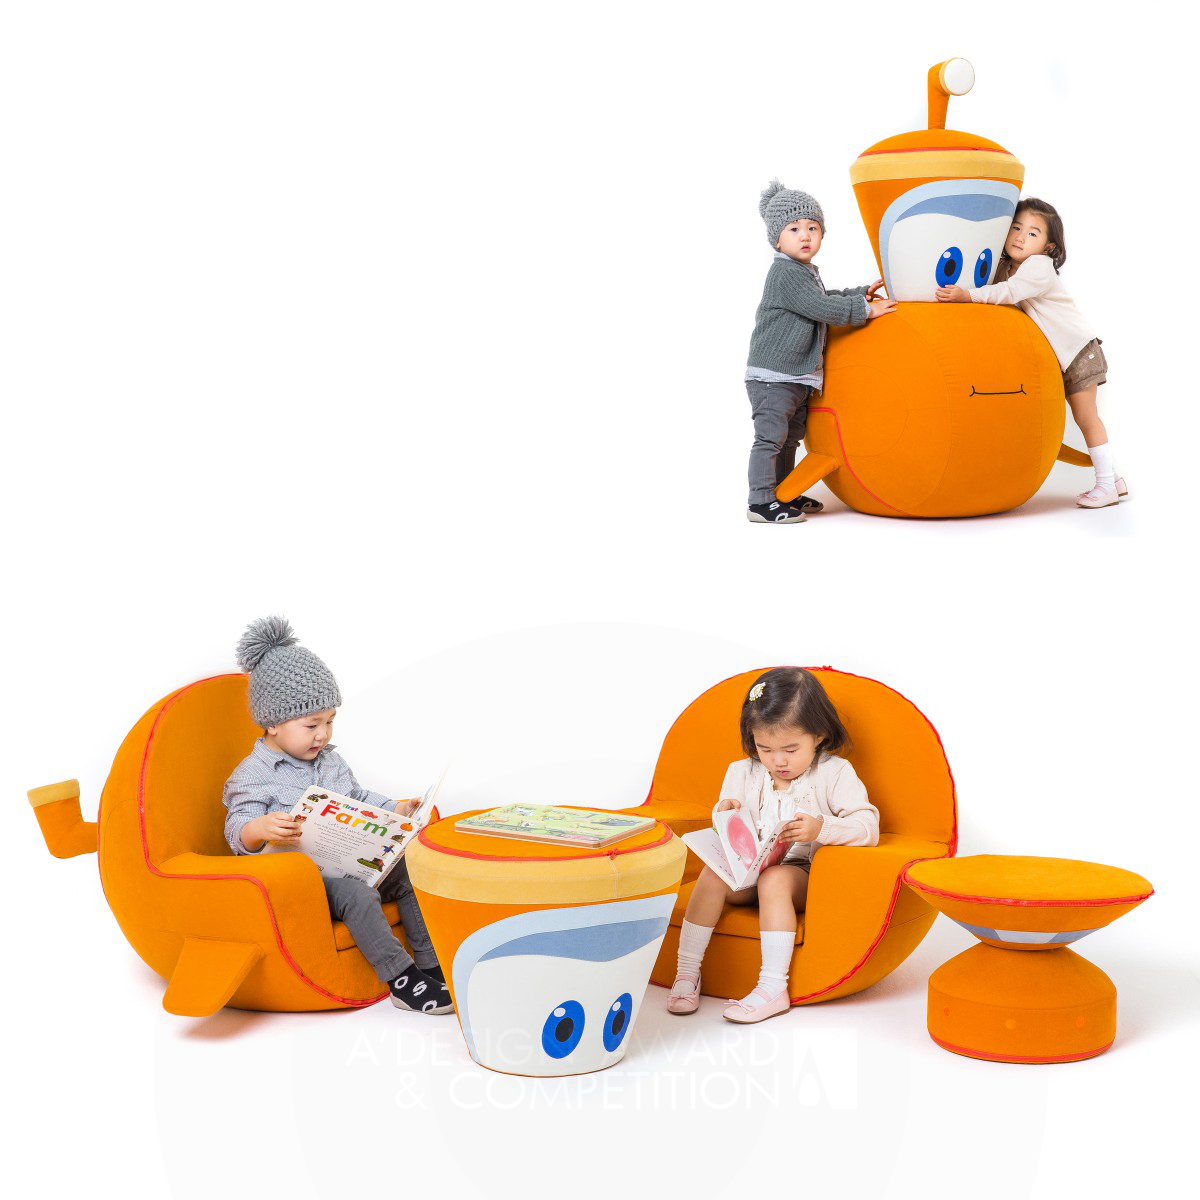 Honeydew Rabbit Marin Kids Soft Chair and Table by Junghye Yoon